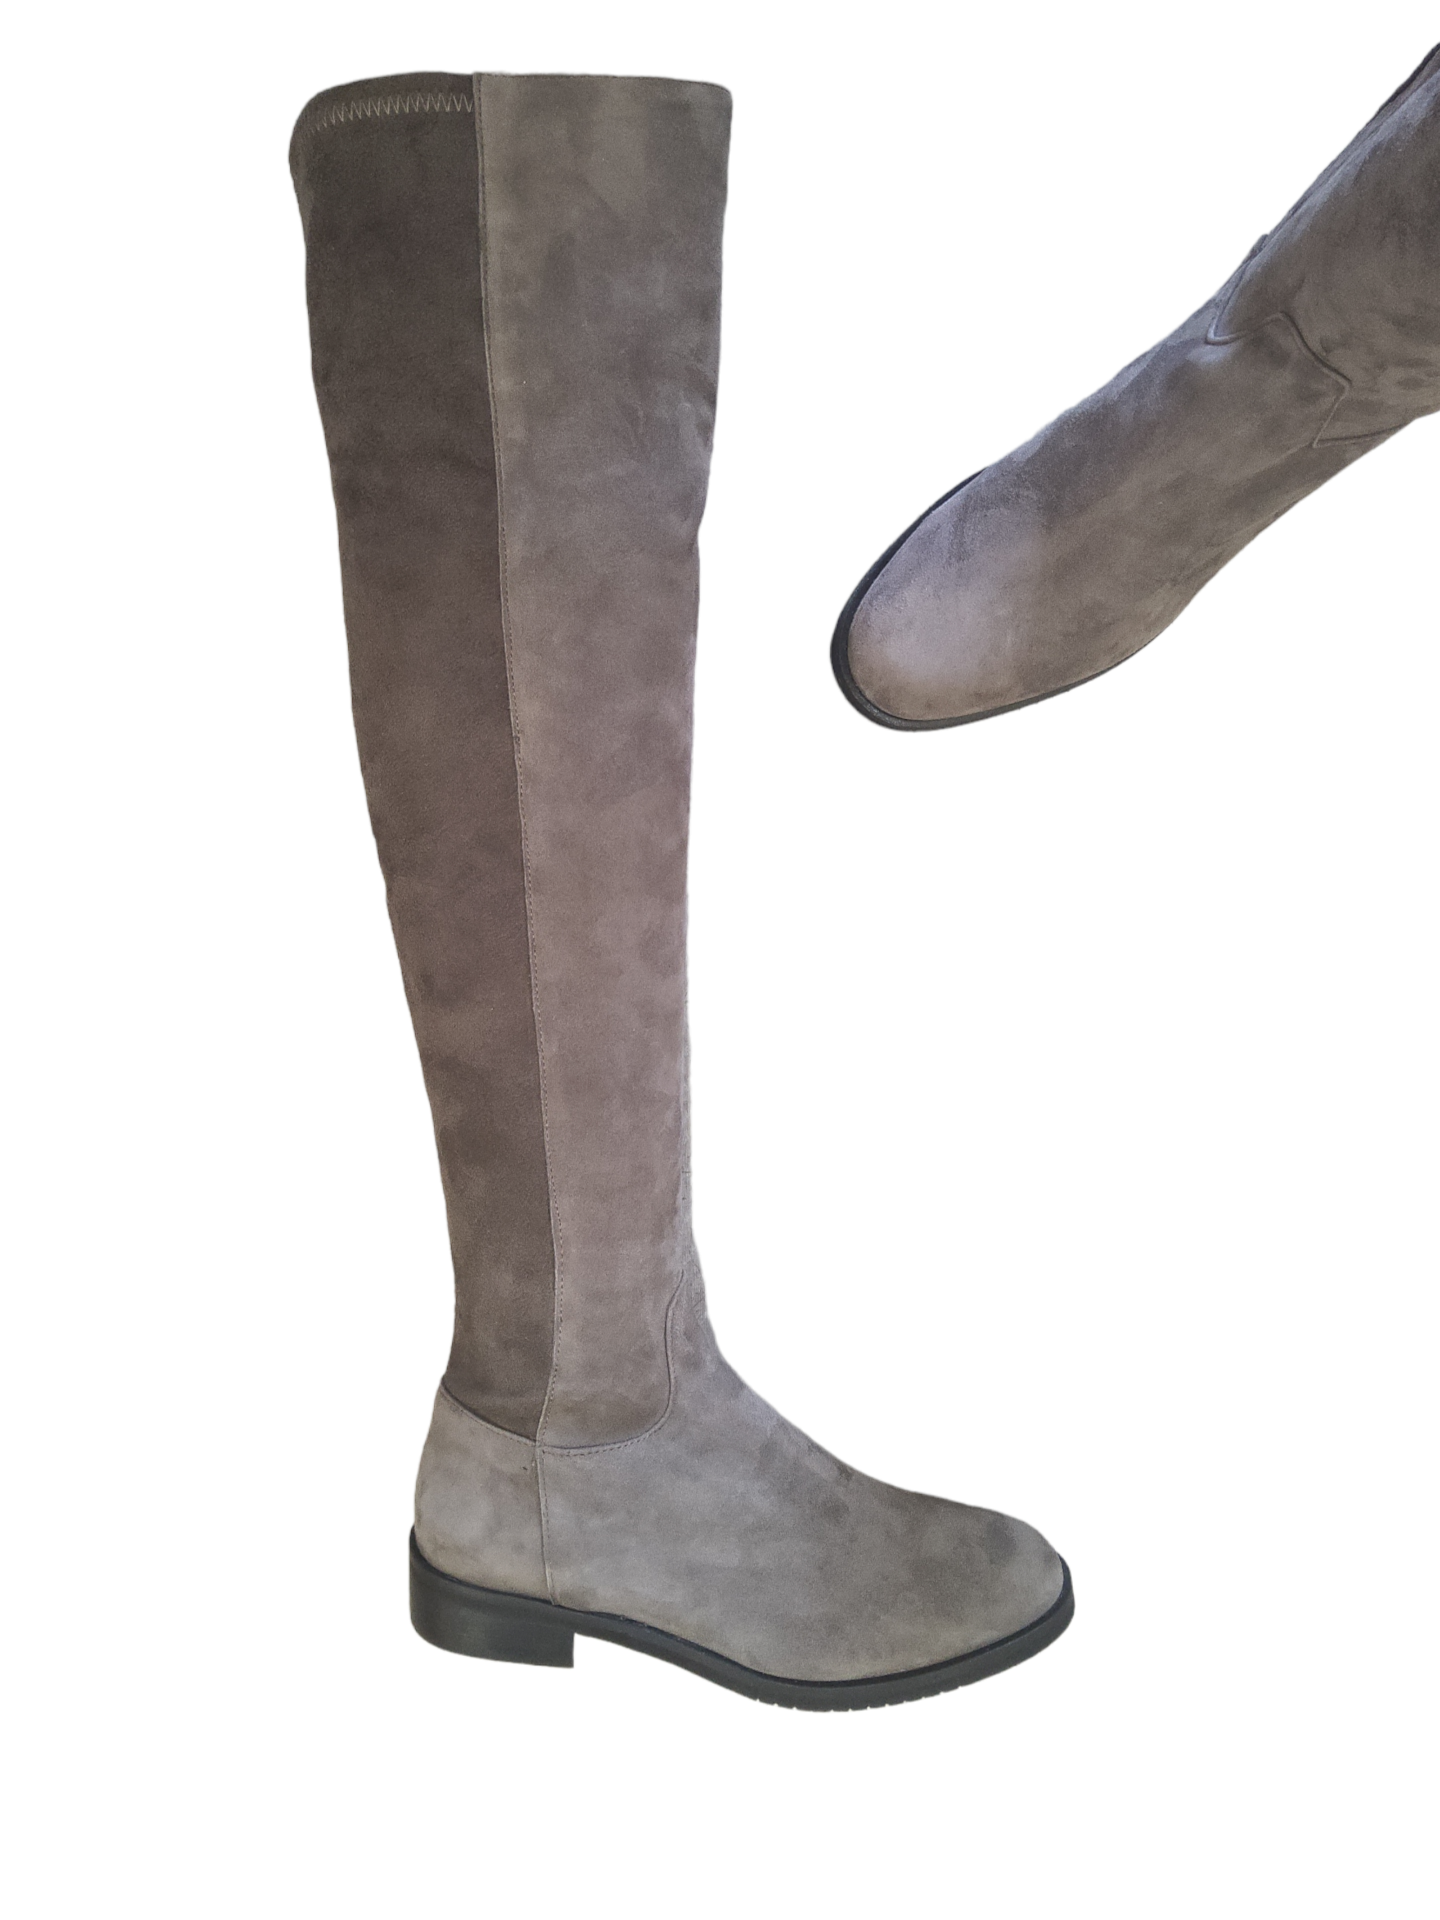 Taupe leather boot.